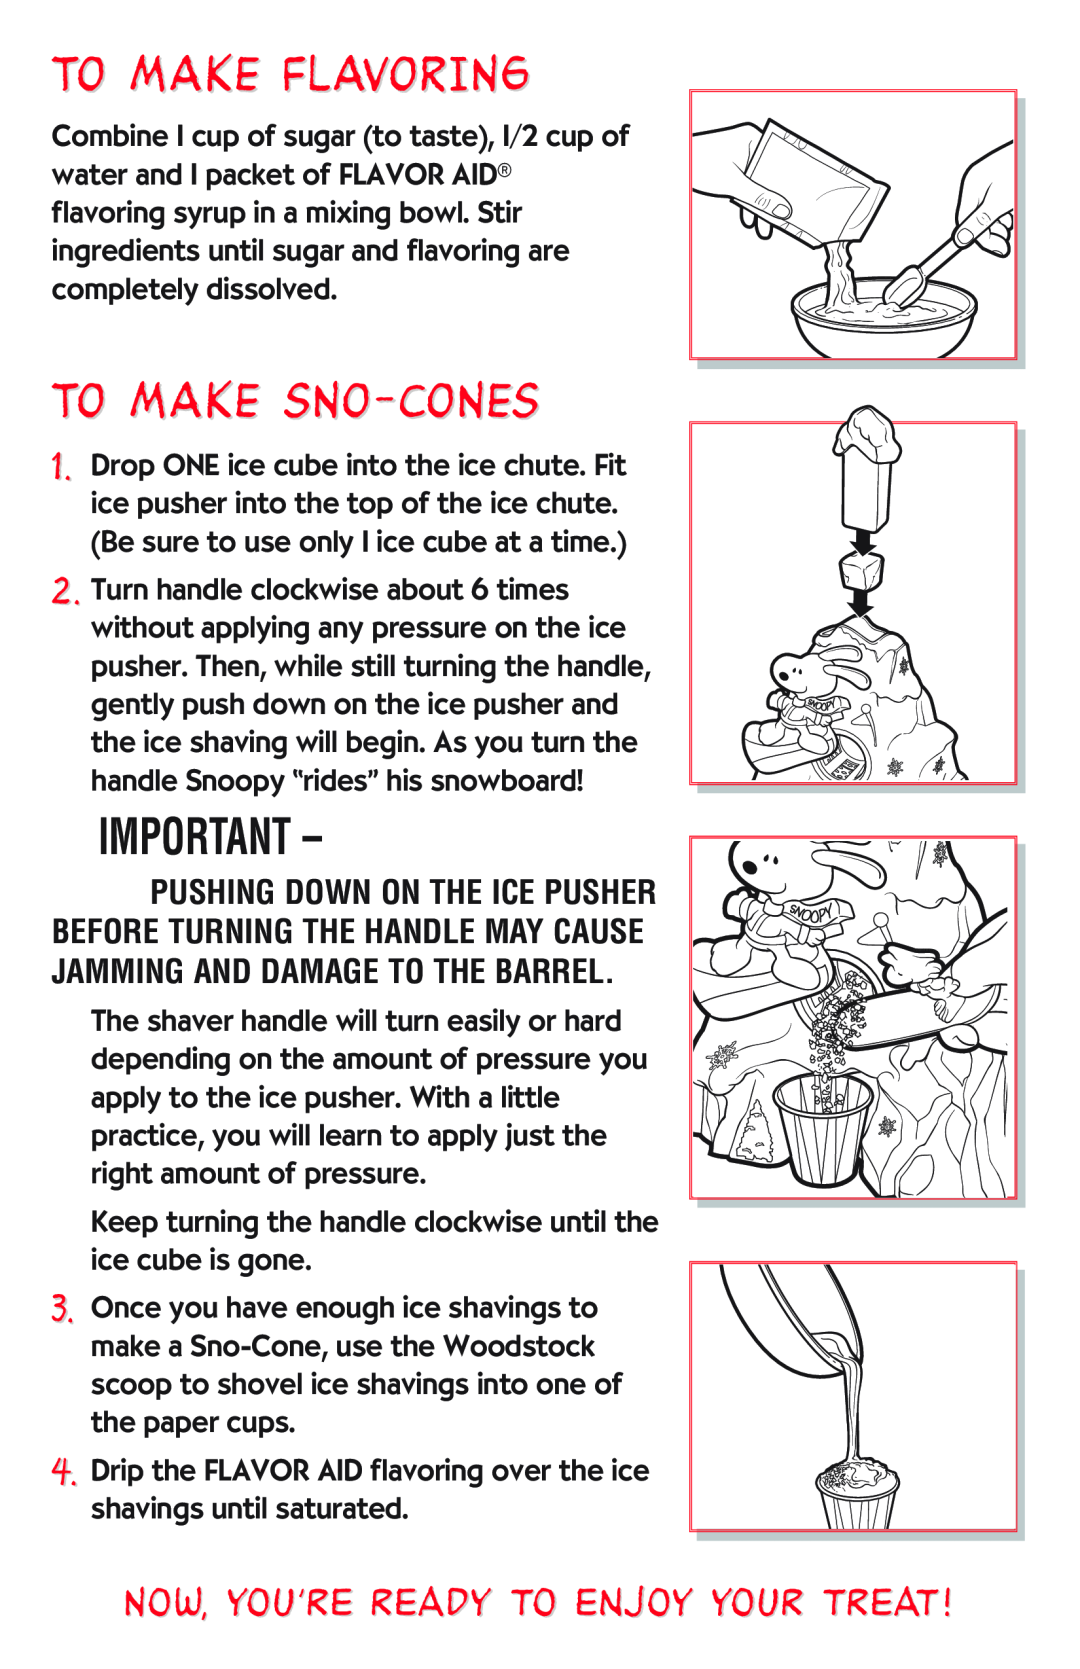 Hasbro 30001 manual To Make Flavoring, To Make Sno-Cones, Now, you’re ready to enjoy your treat 